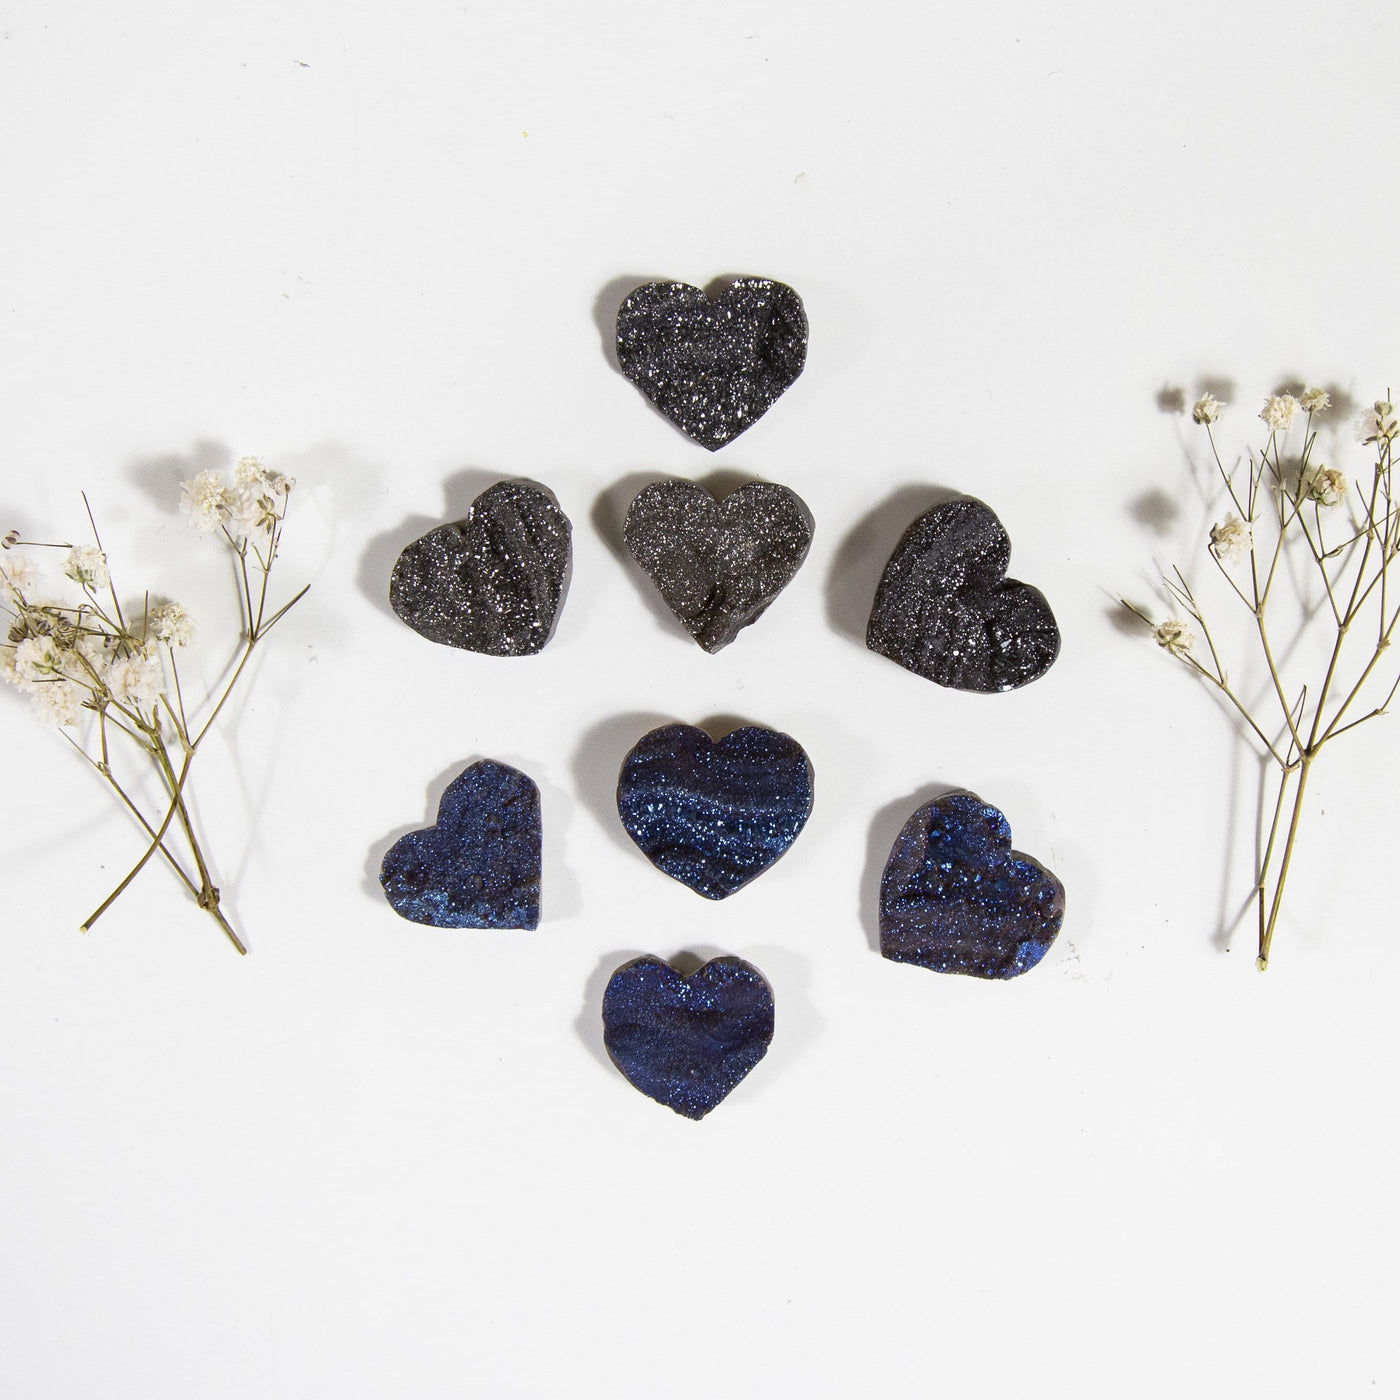 Chalcedony Titanium Treated Hearts in Mystic Blue and Platinum displayed in quantities of 4 each on white background